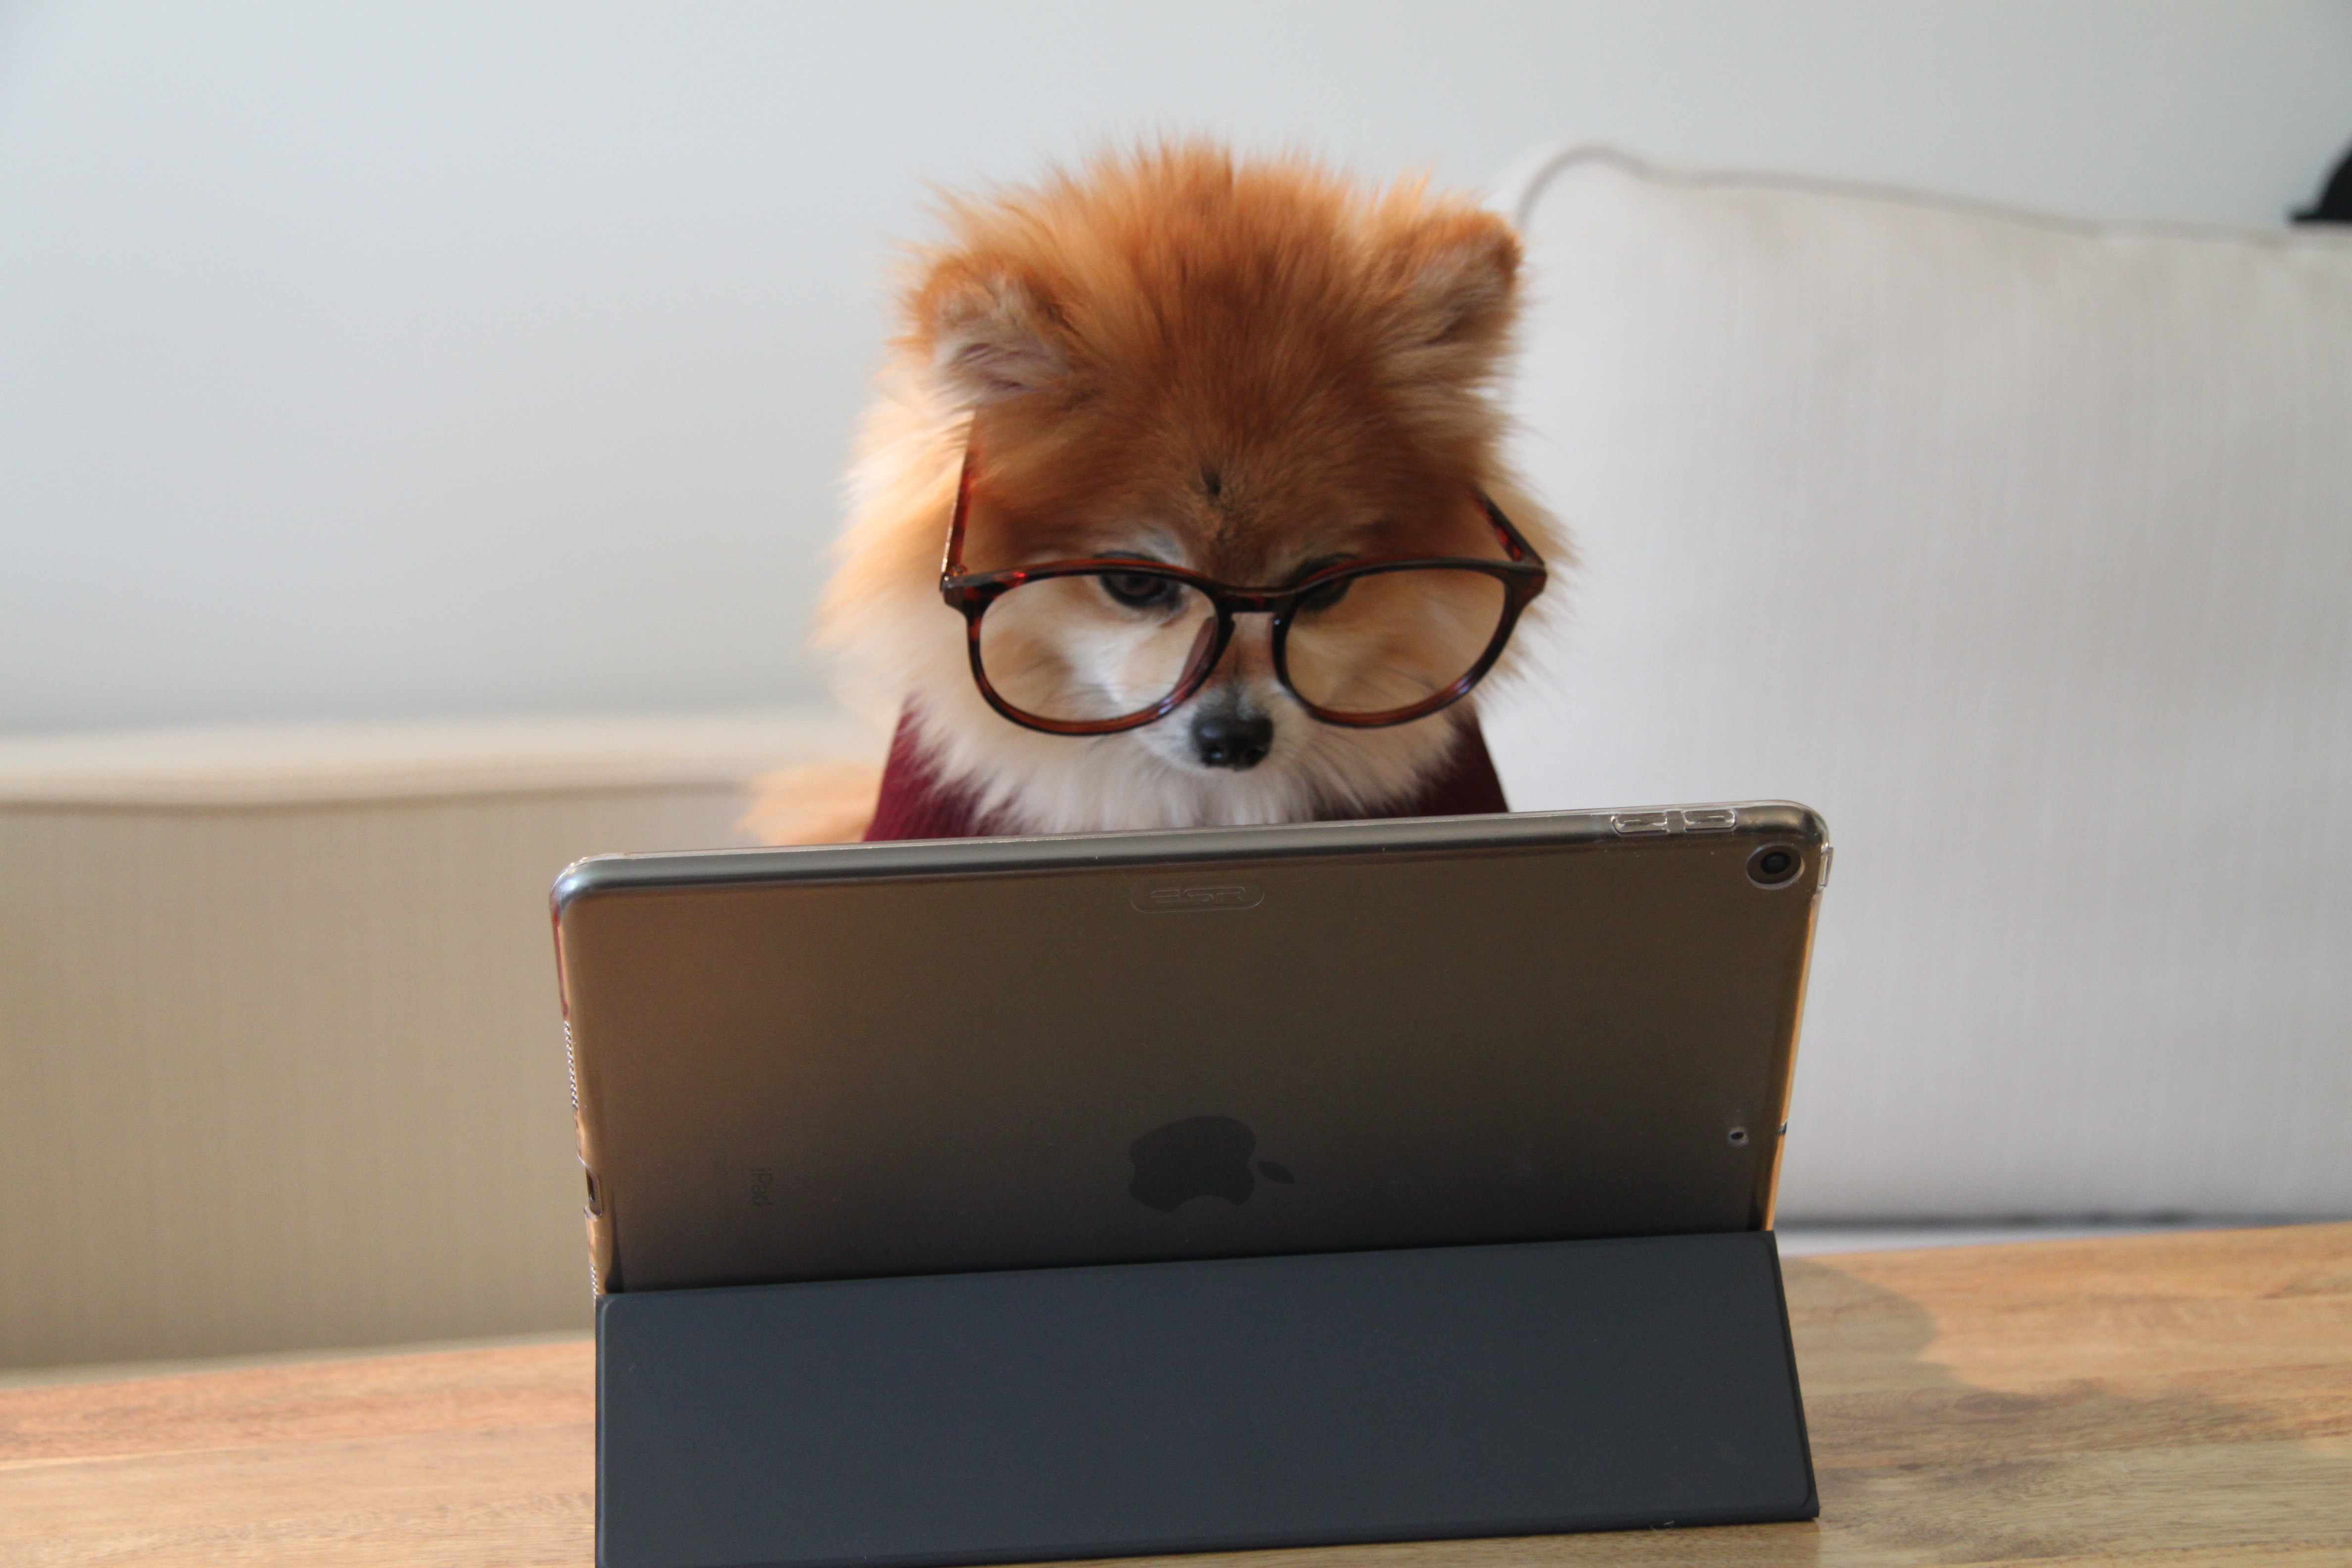 dog with glasses on looking at tablet for estatements